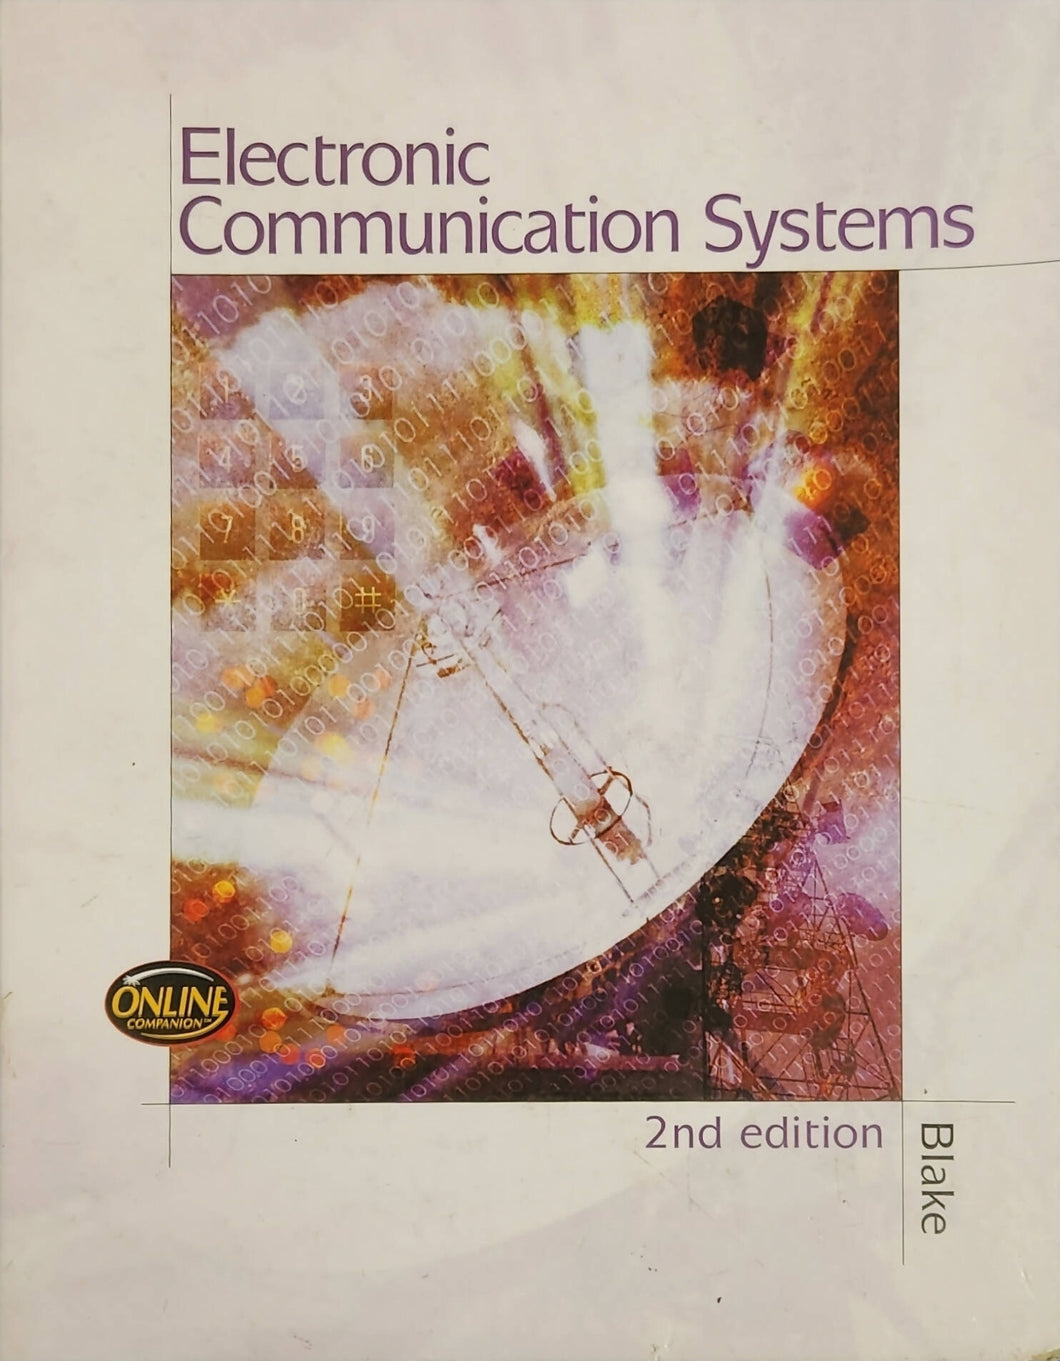 Electronic Communication Systems, 2nd Edition